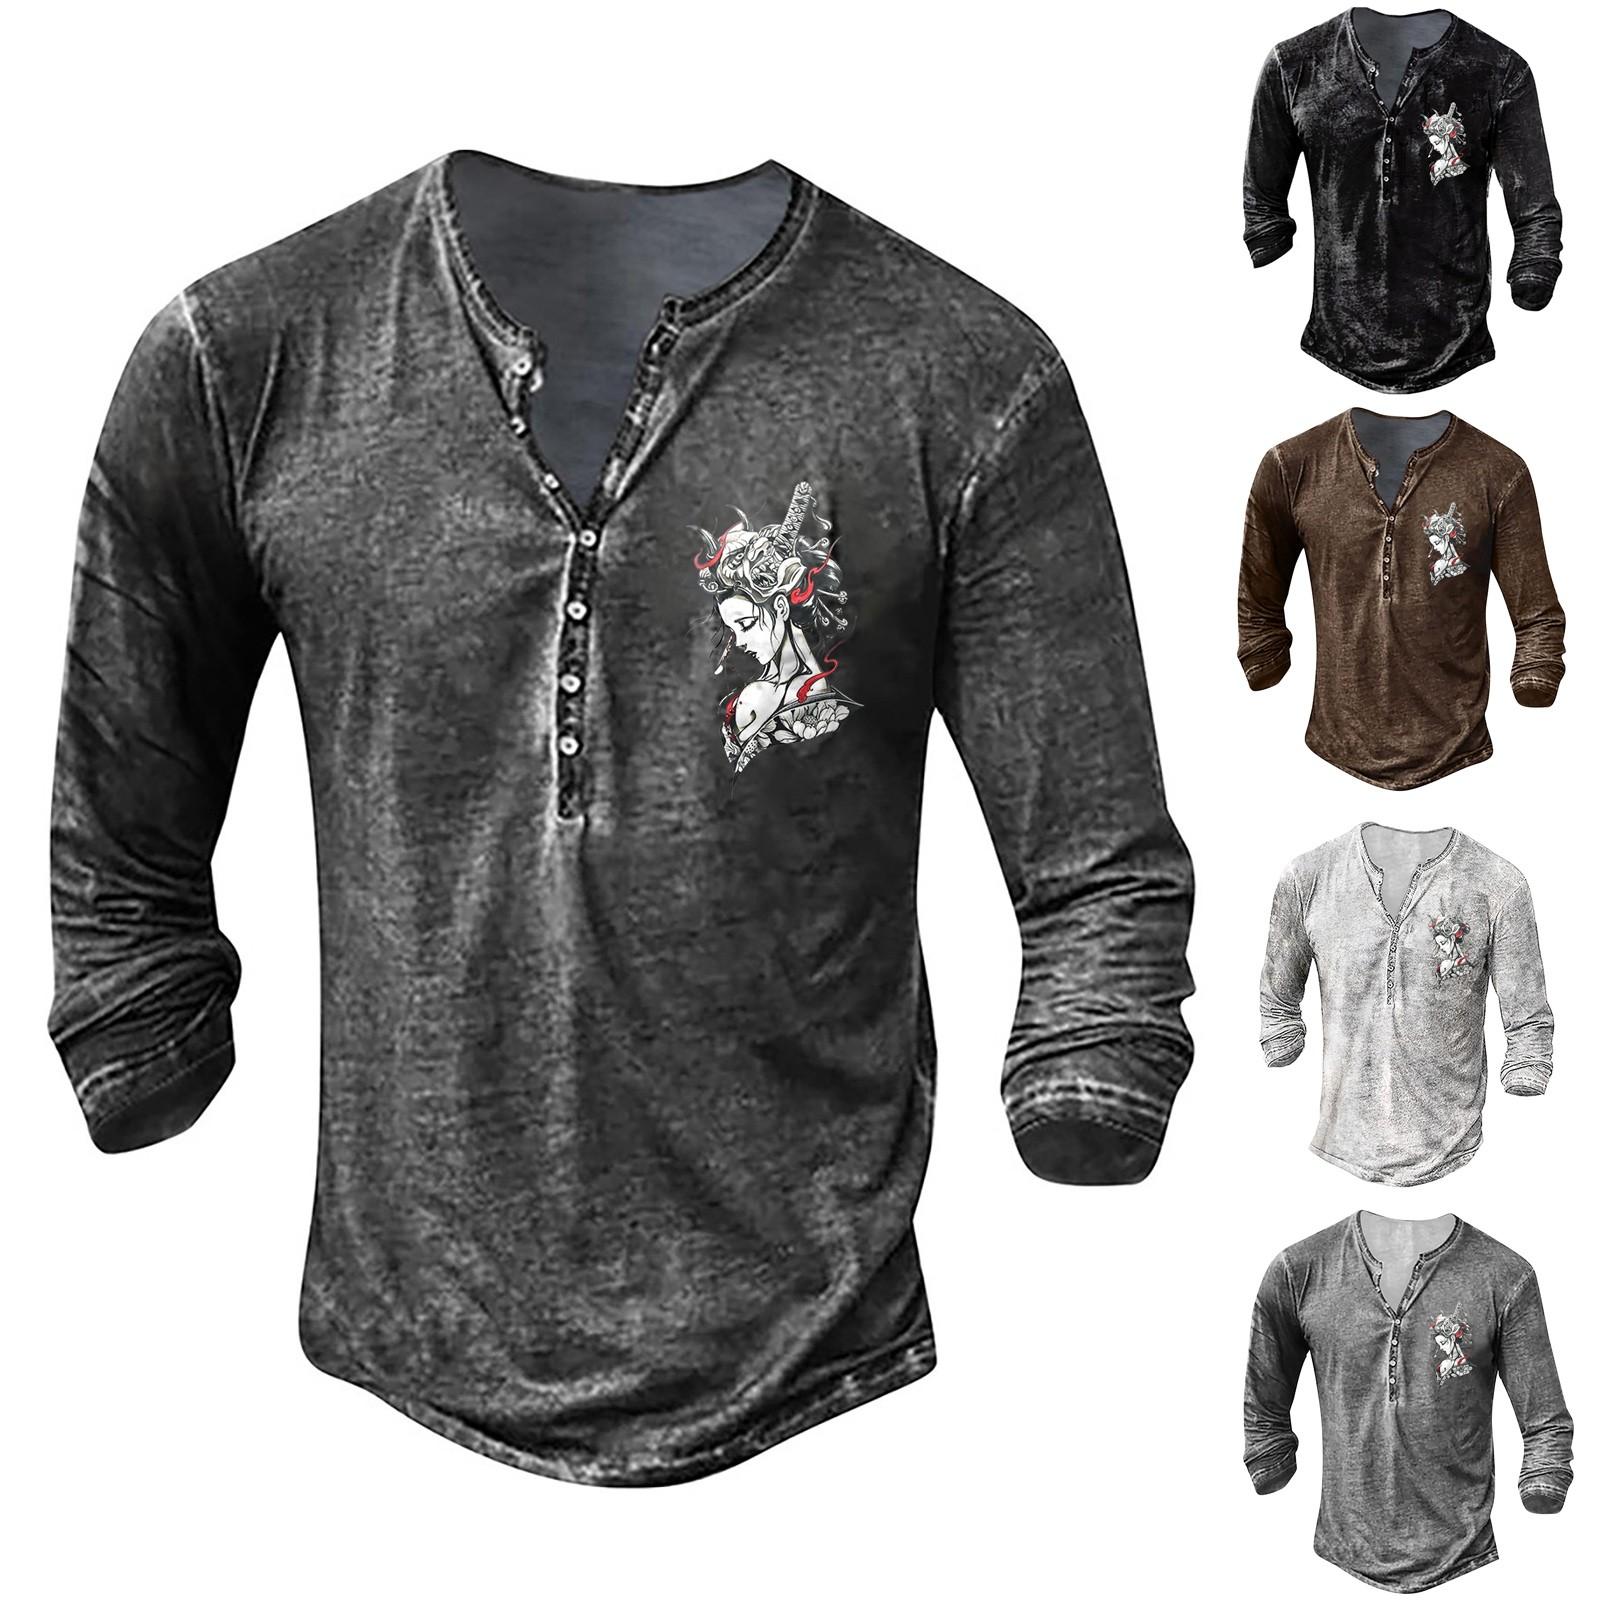 Free birds Men's Long Sleeve Graphic And Embroidered Fashion T-Shirt Spring And Autumn Long Sleeve Printed Pullover Top